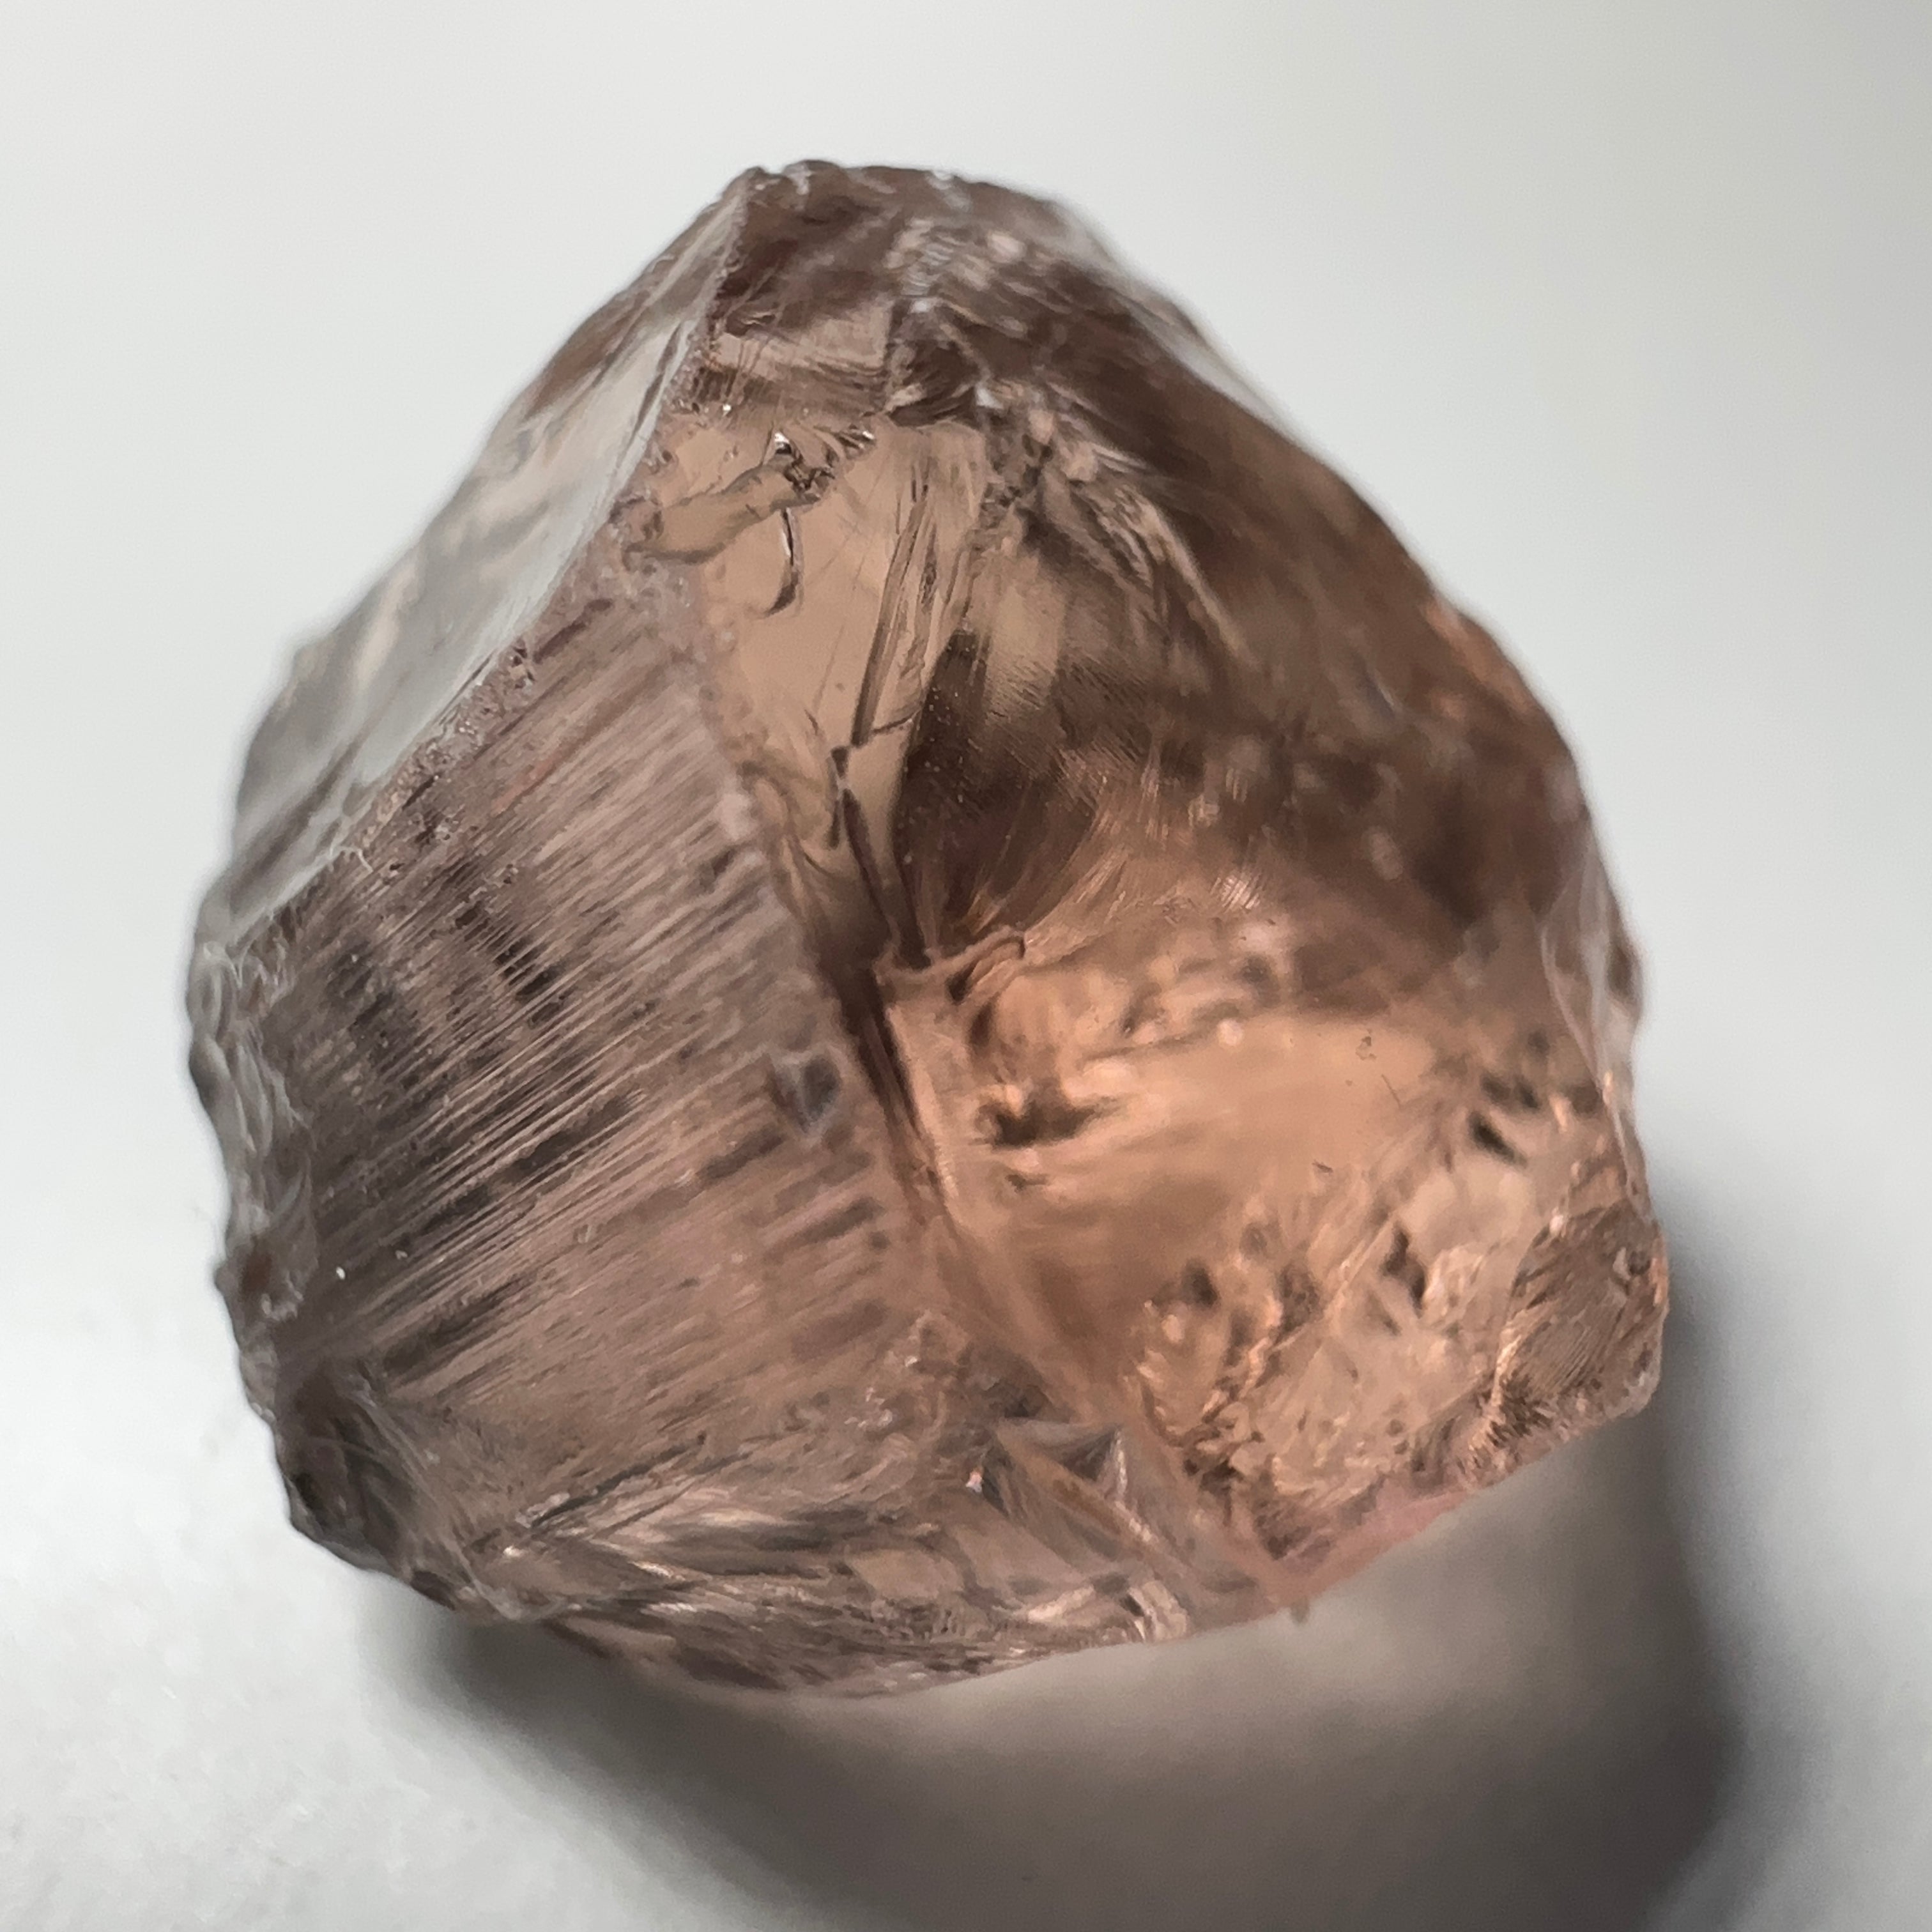 16.45ct Very Rare, Peach Pink Scapolite, Tanzania, Untreated Unheated, VVS-IF (flawless) see video